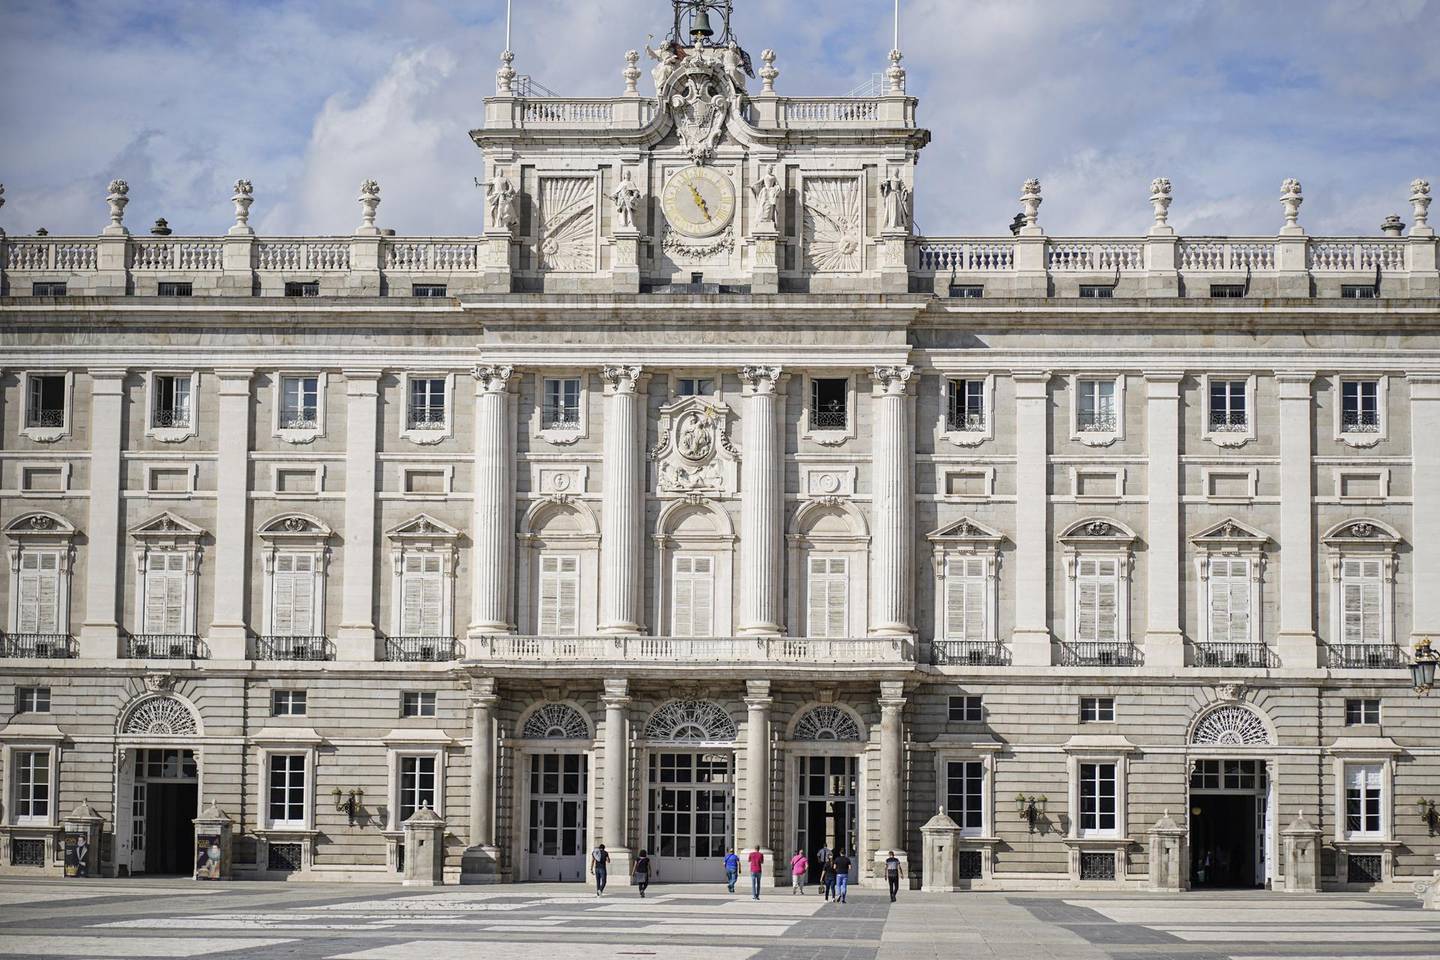 Tourists stand outside the royal palace in Madrid, Spain, on Tuesday, Sept. 22, 2020. The Madrid regional government said last week it will test 1 million people — about every seventh resident of the Spanish capital region — for Covid-19 over the next week to stem the surge in cases. Photographer: Paul Hanna/Bloomberg